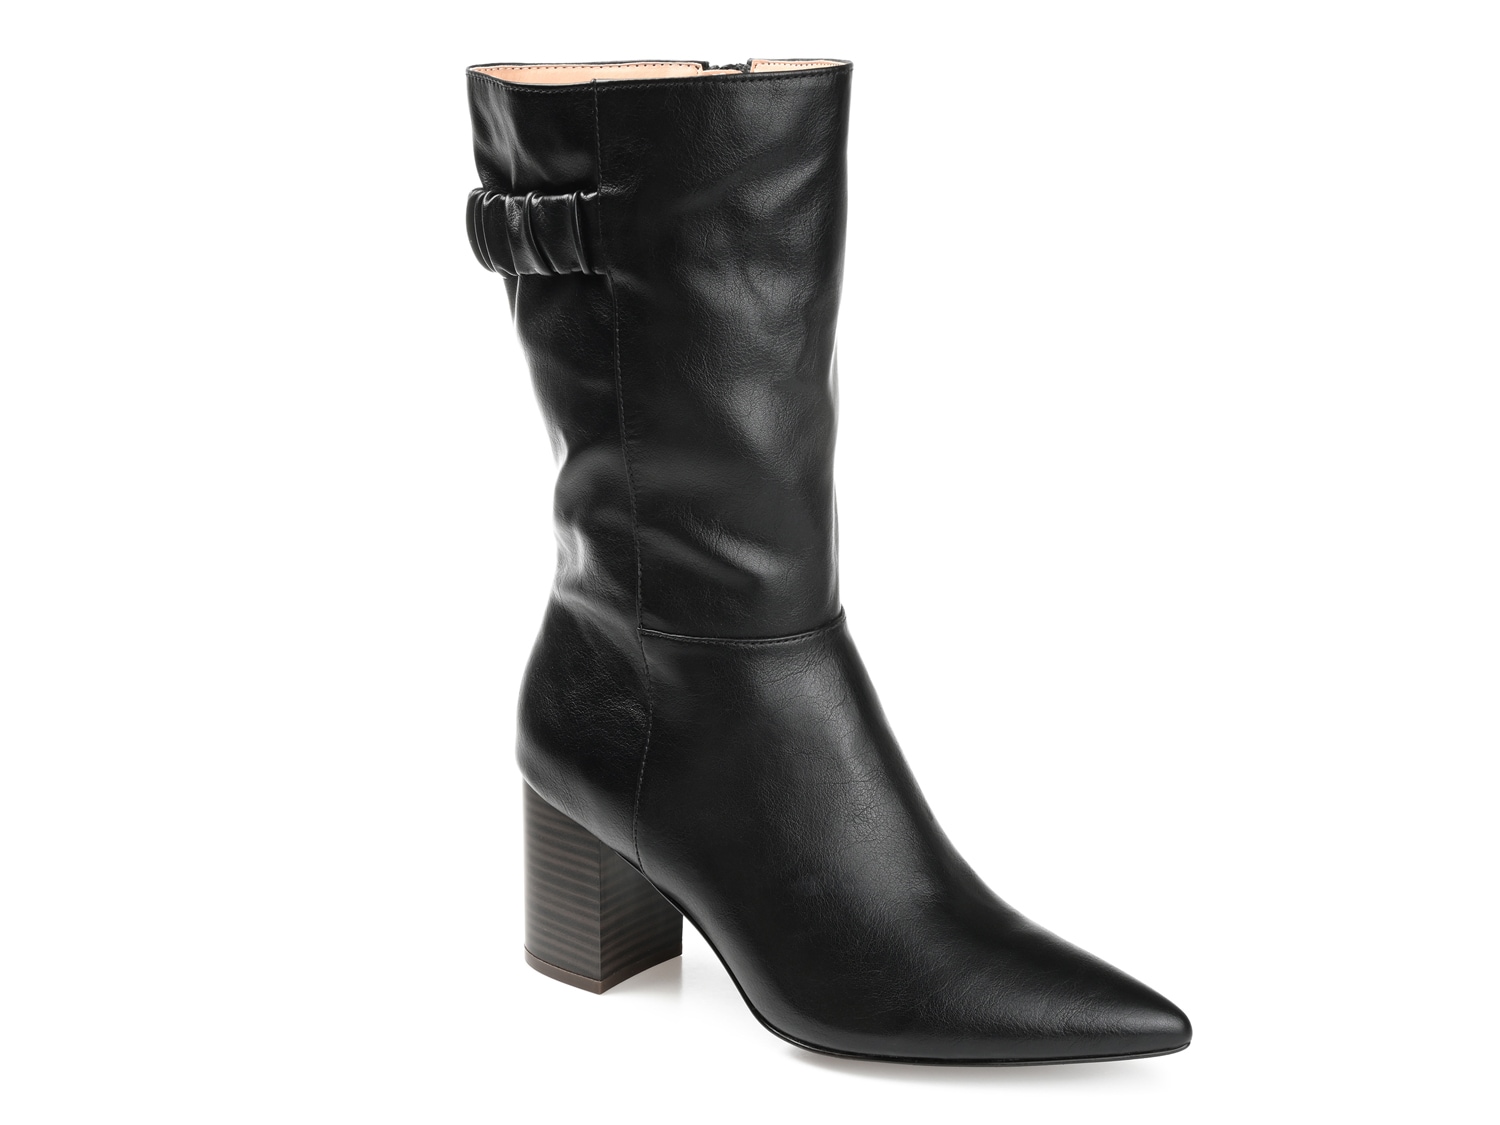 Journee Collection Wilo Wide Calf Boot - Free Shipping | DSW